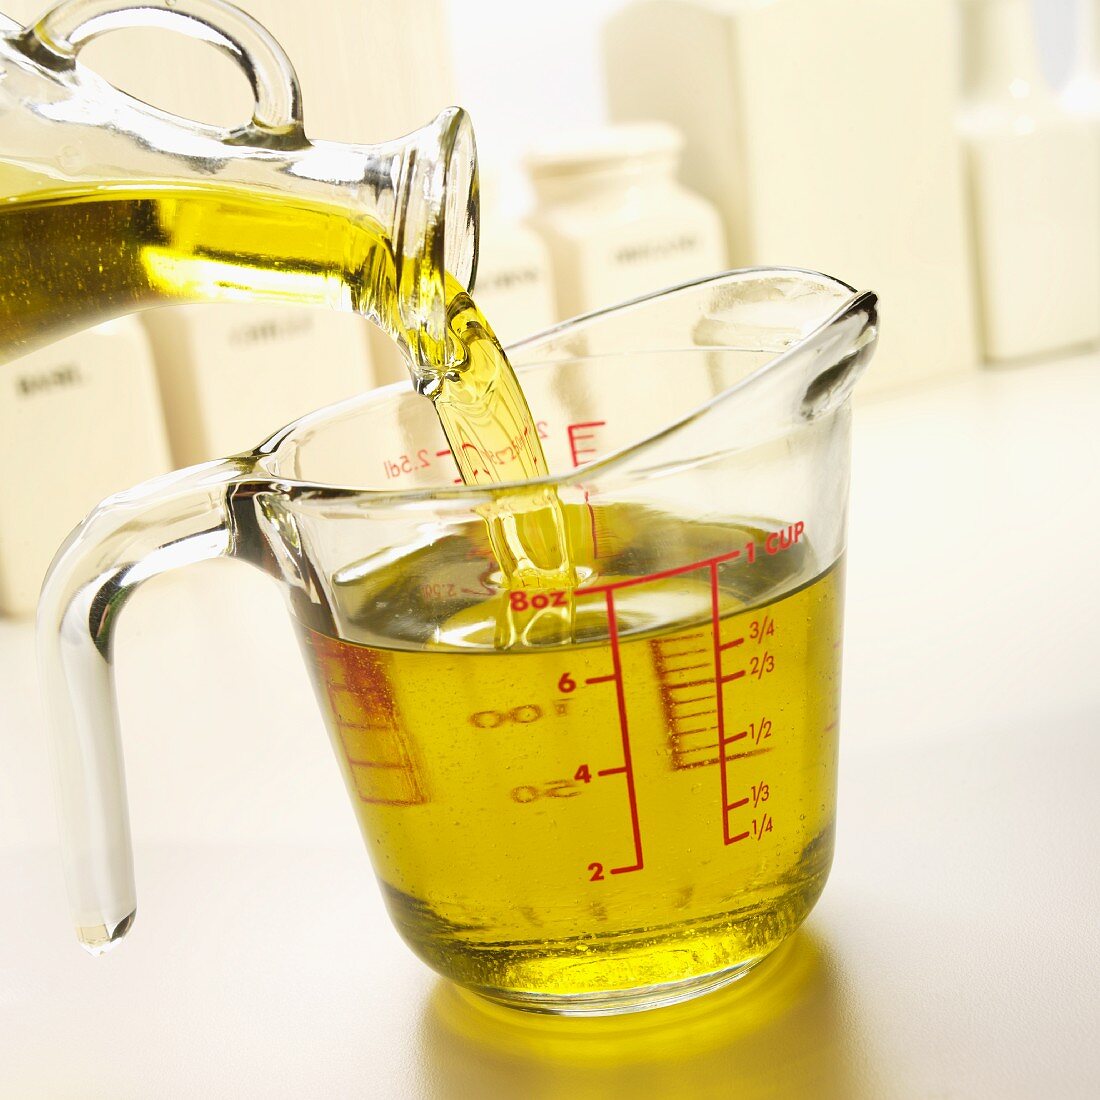 https://media02.stockfood.com/largepreviews/MzQ4MzEwOTQ3/11235837-Pouring-Olive-Oil-into-a-Glass-Measuring-Cup.jpg